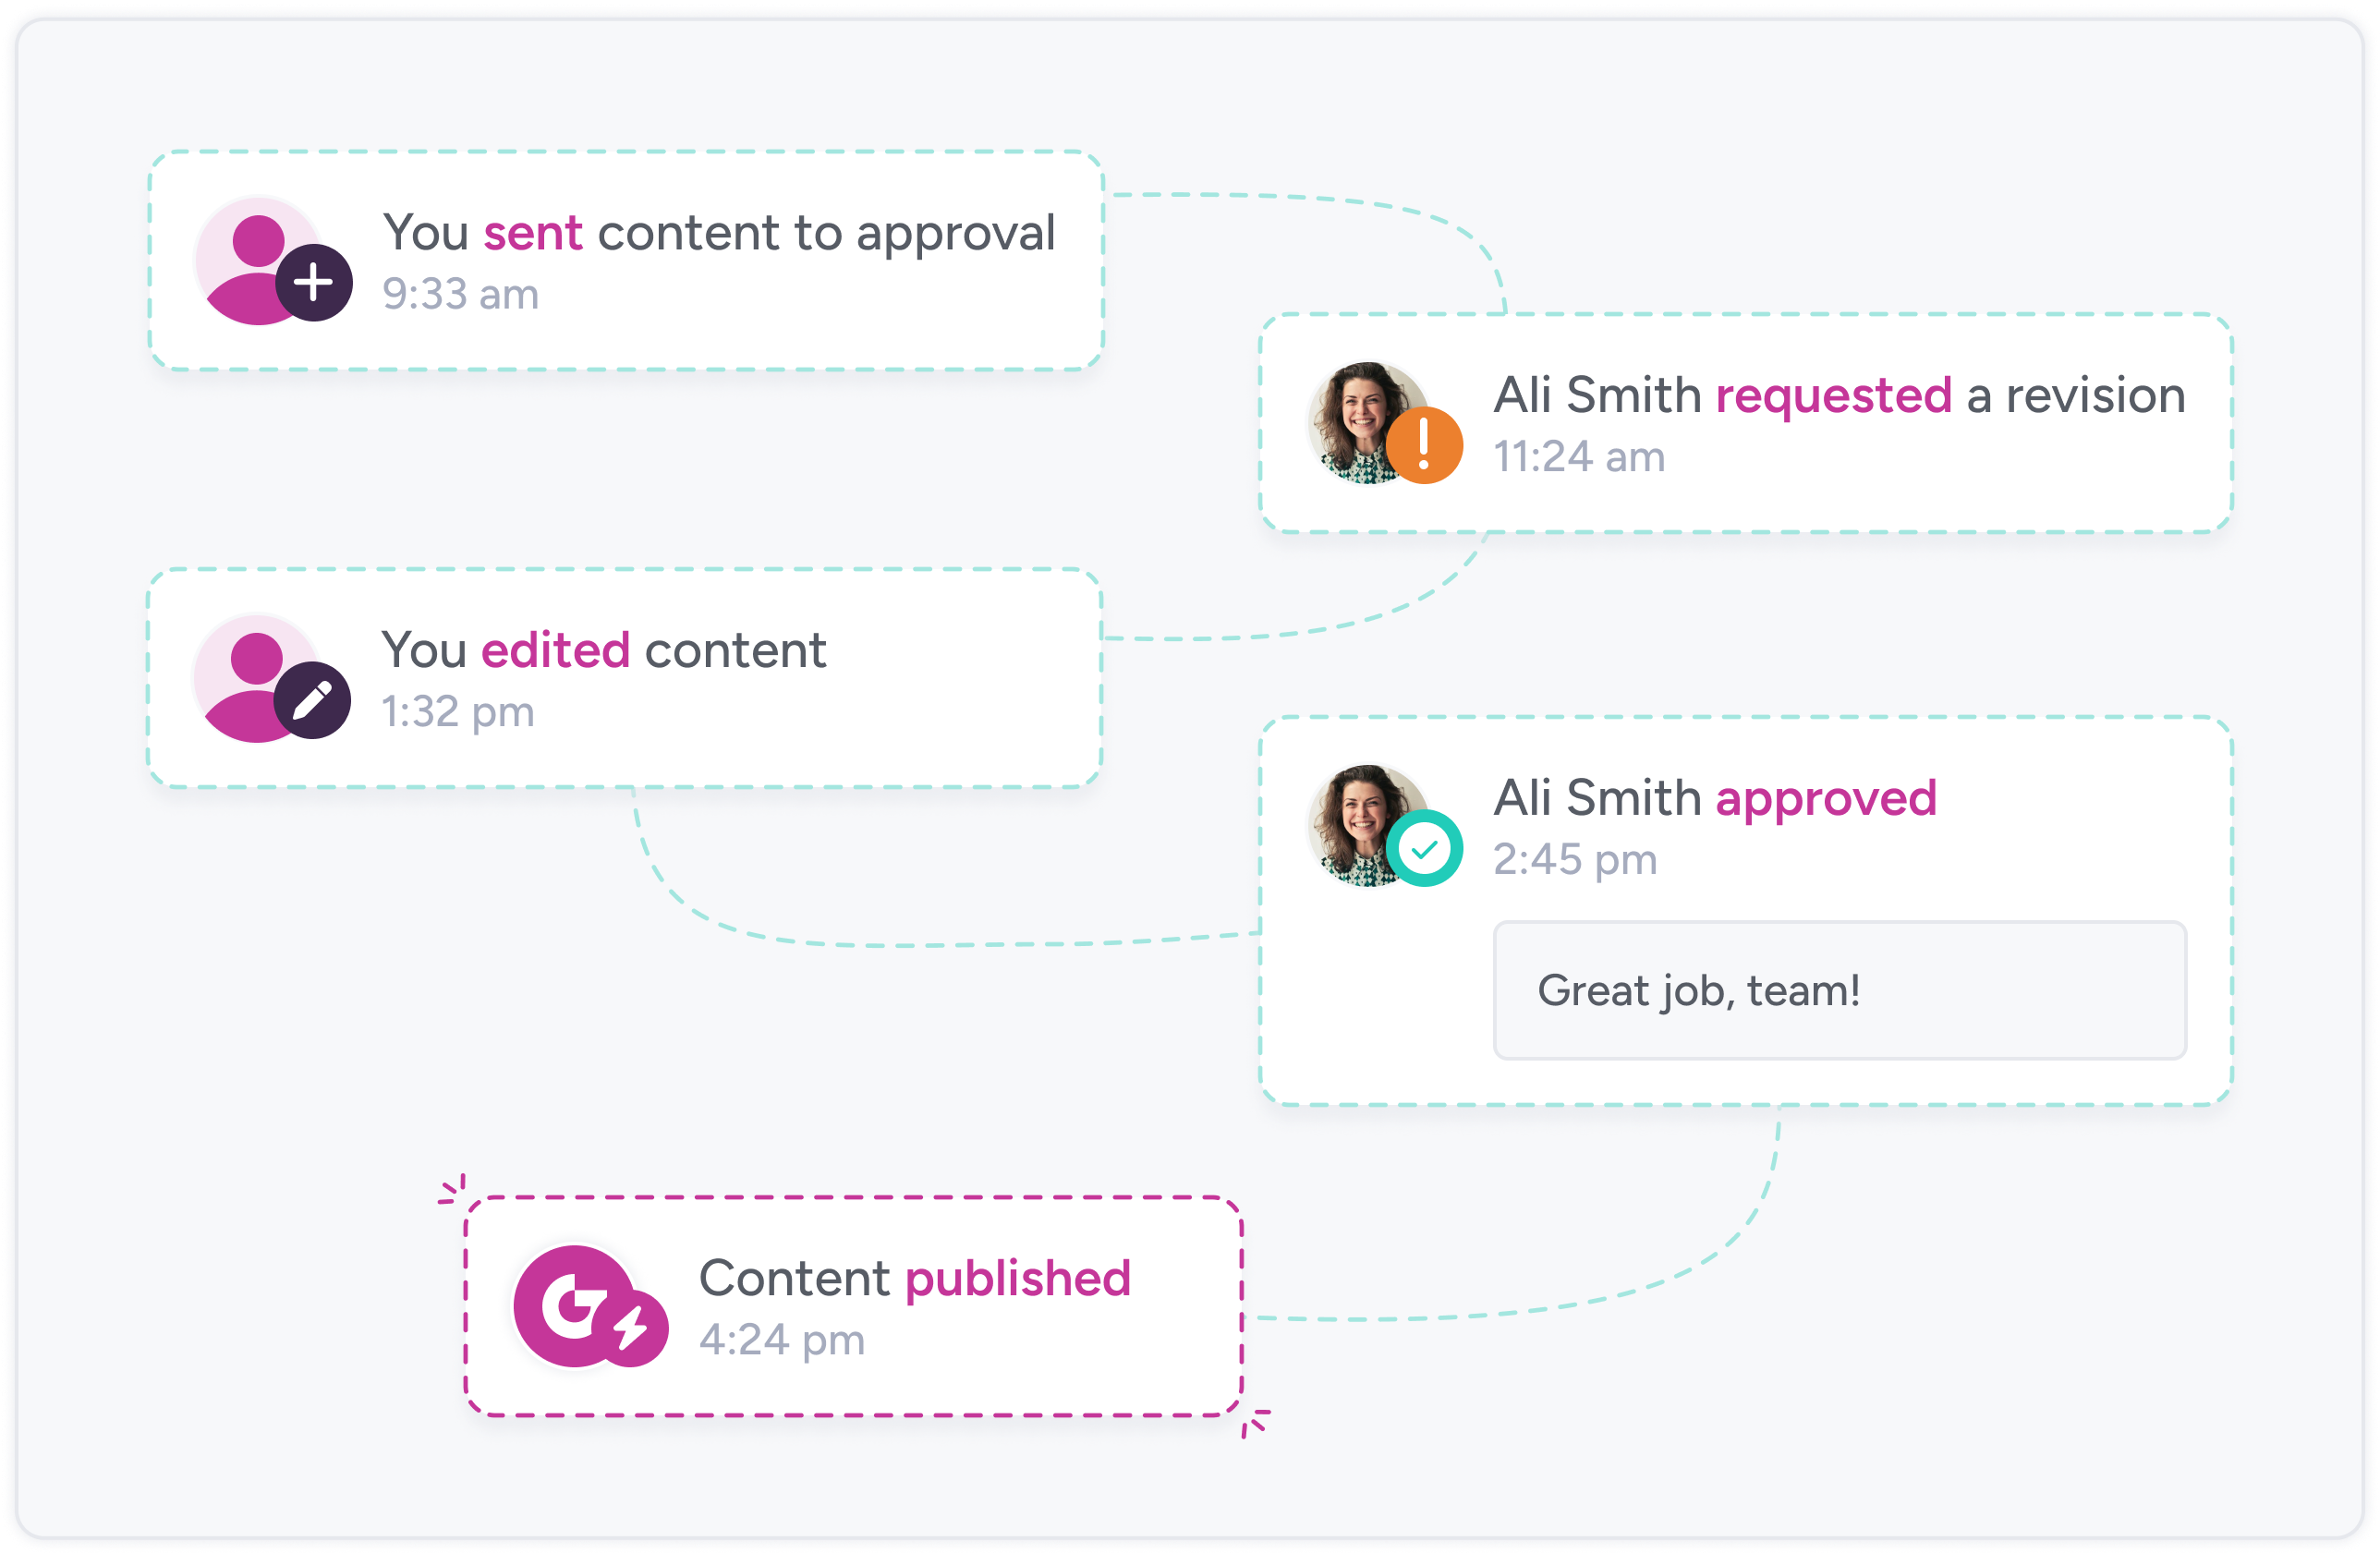 A sequence of events showing content being sent to approval, then approved by a client, and published by Gain